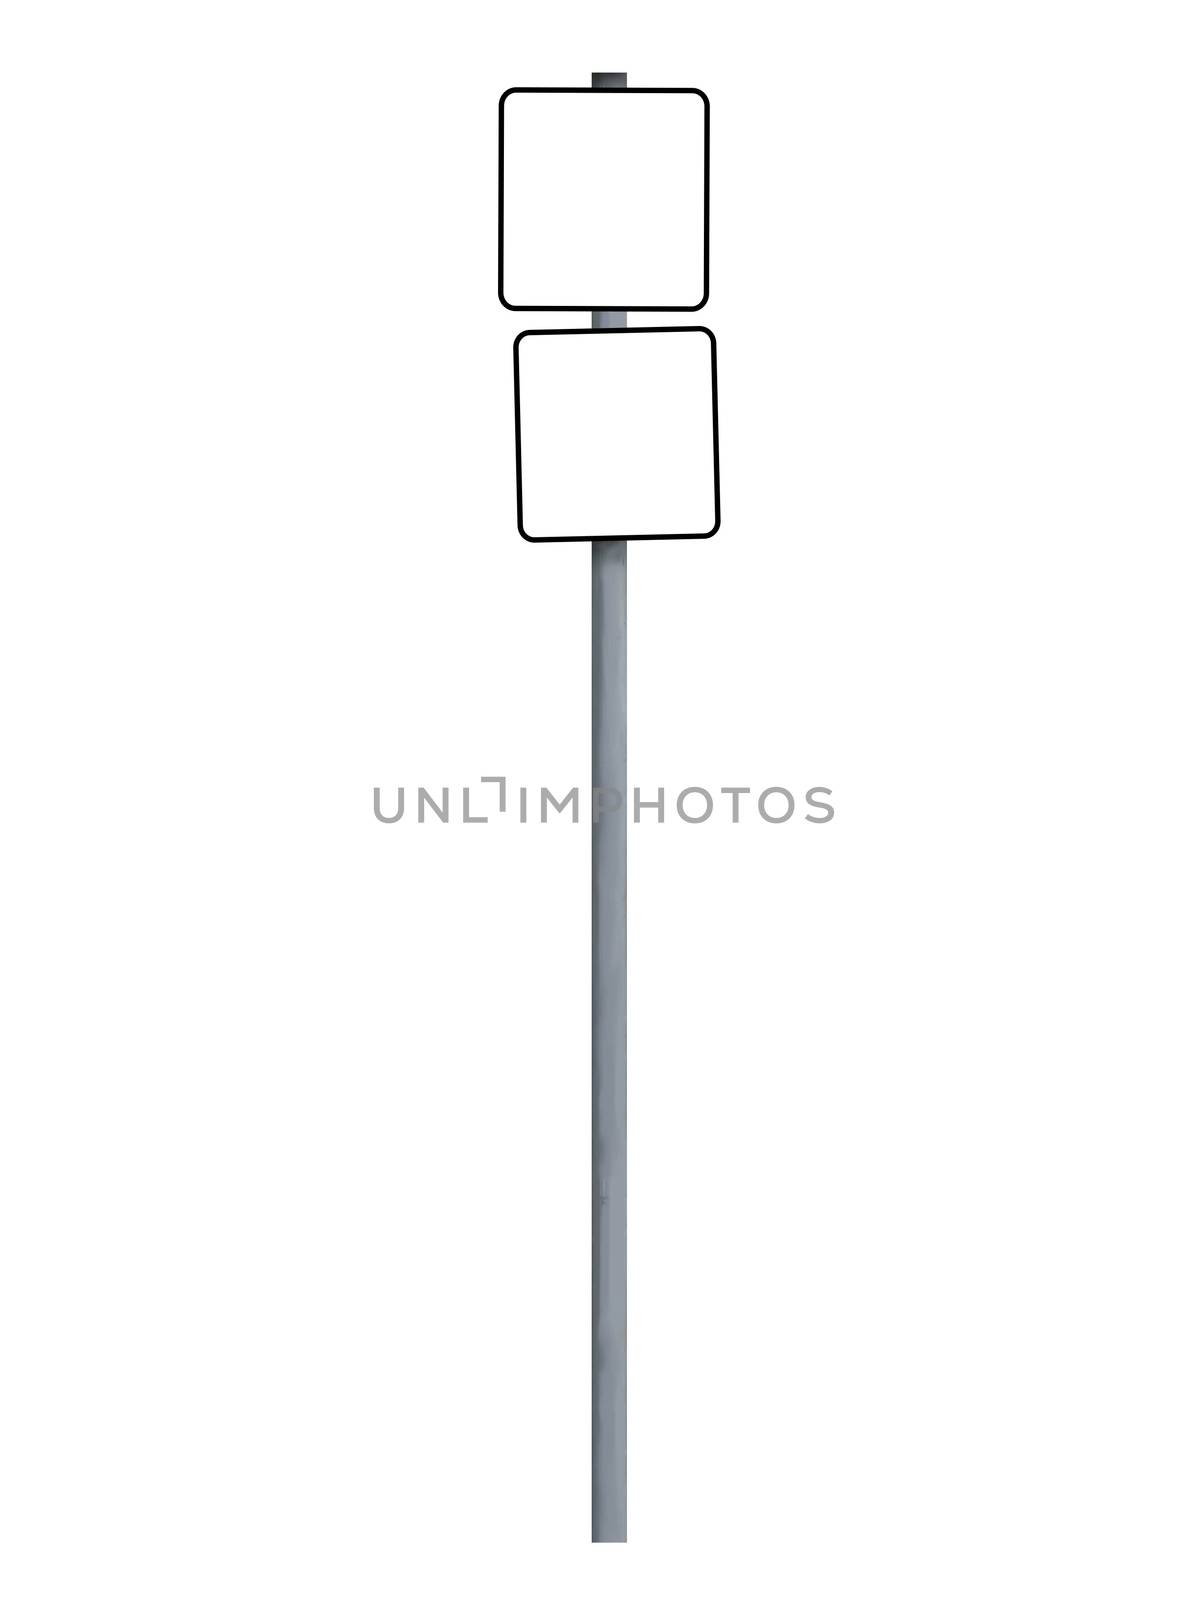 Sign pole isolated with copyspace by fjanecic